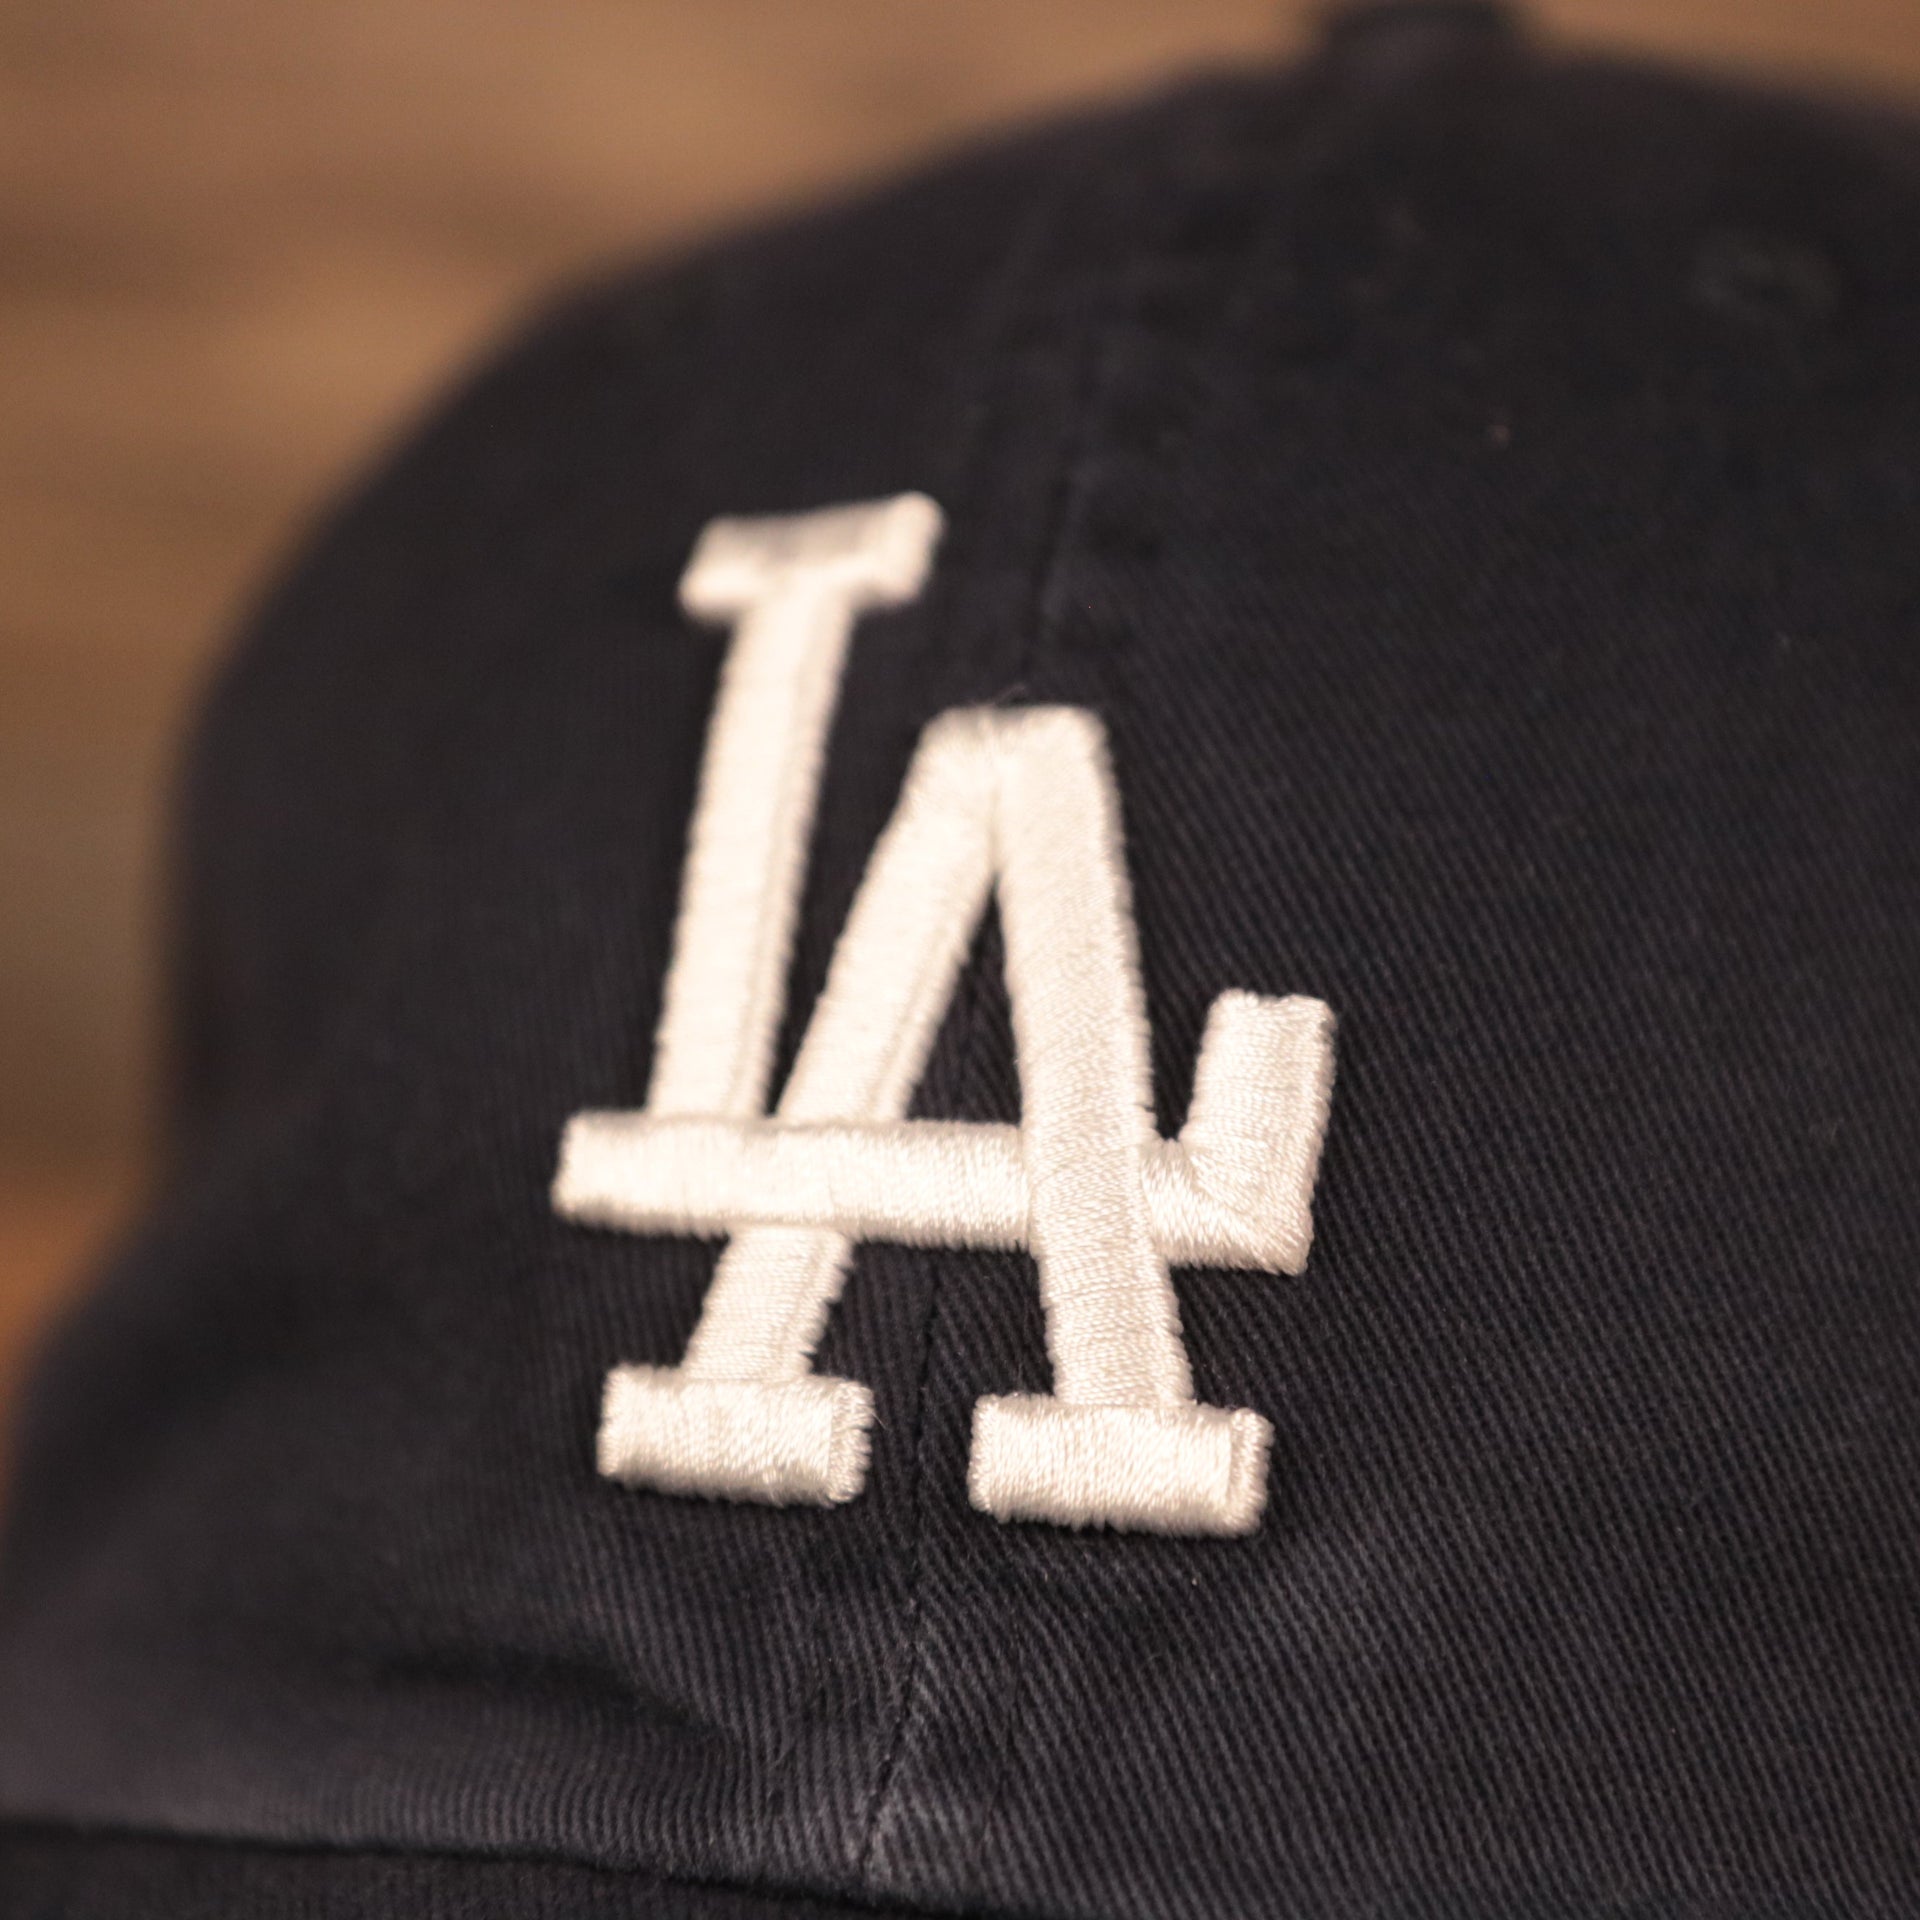 The white Los Angeles Dodgers logo on the front of the pink bottom ball cap by 47 Brand.